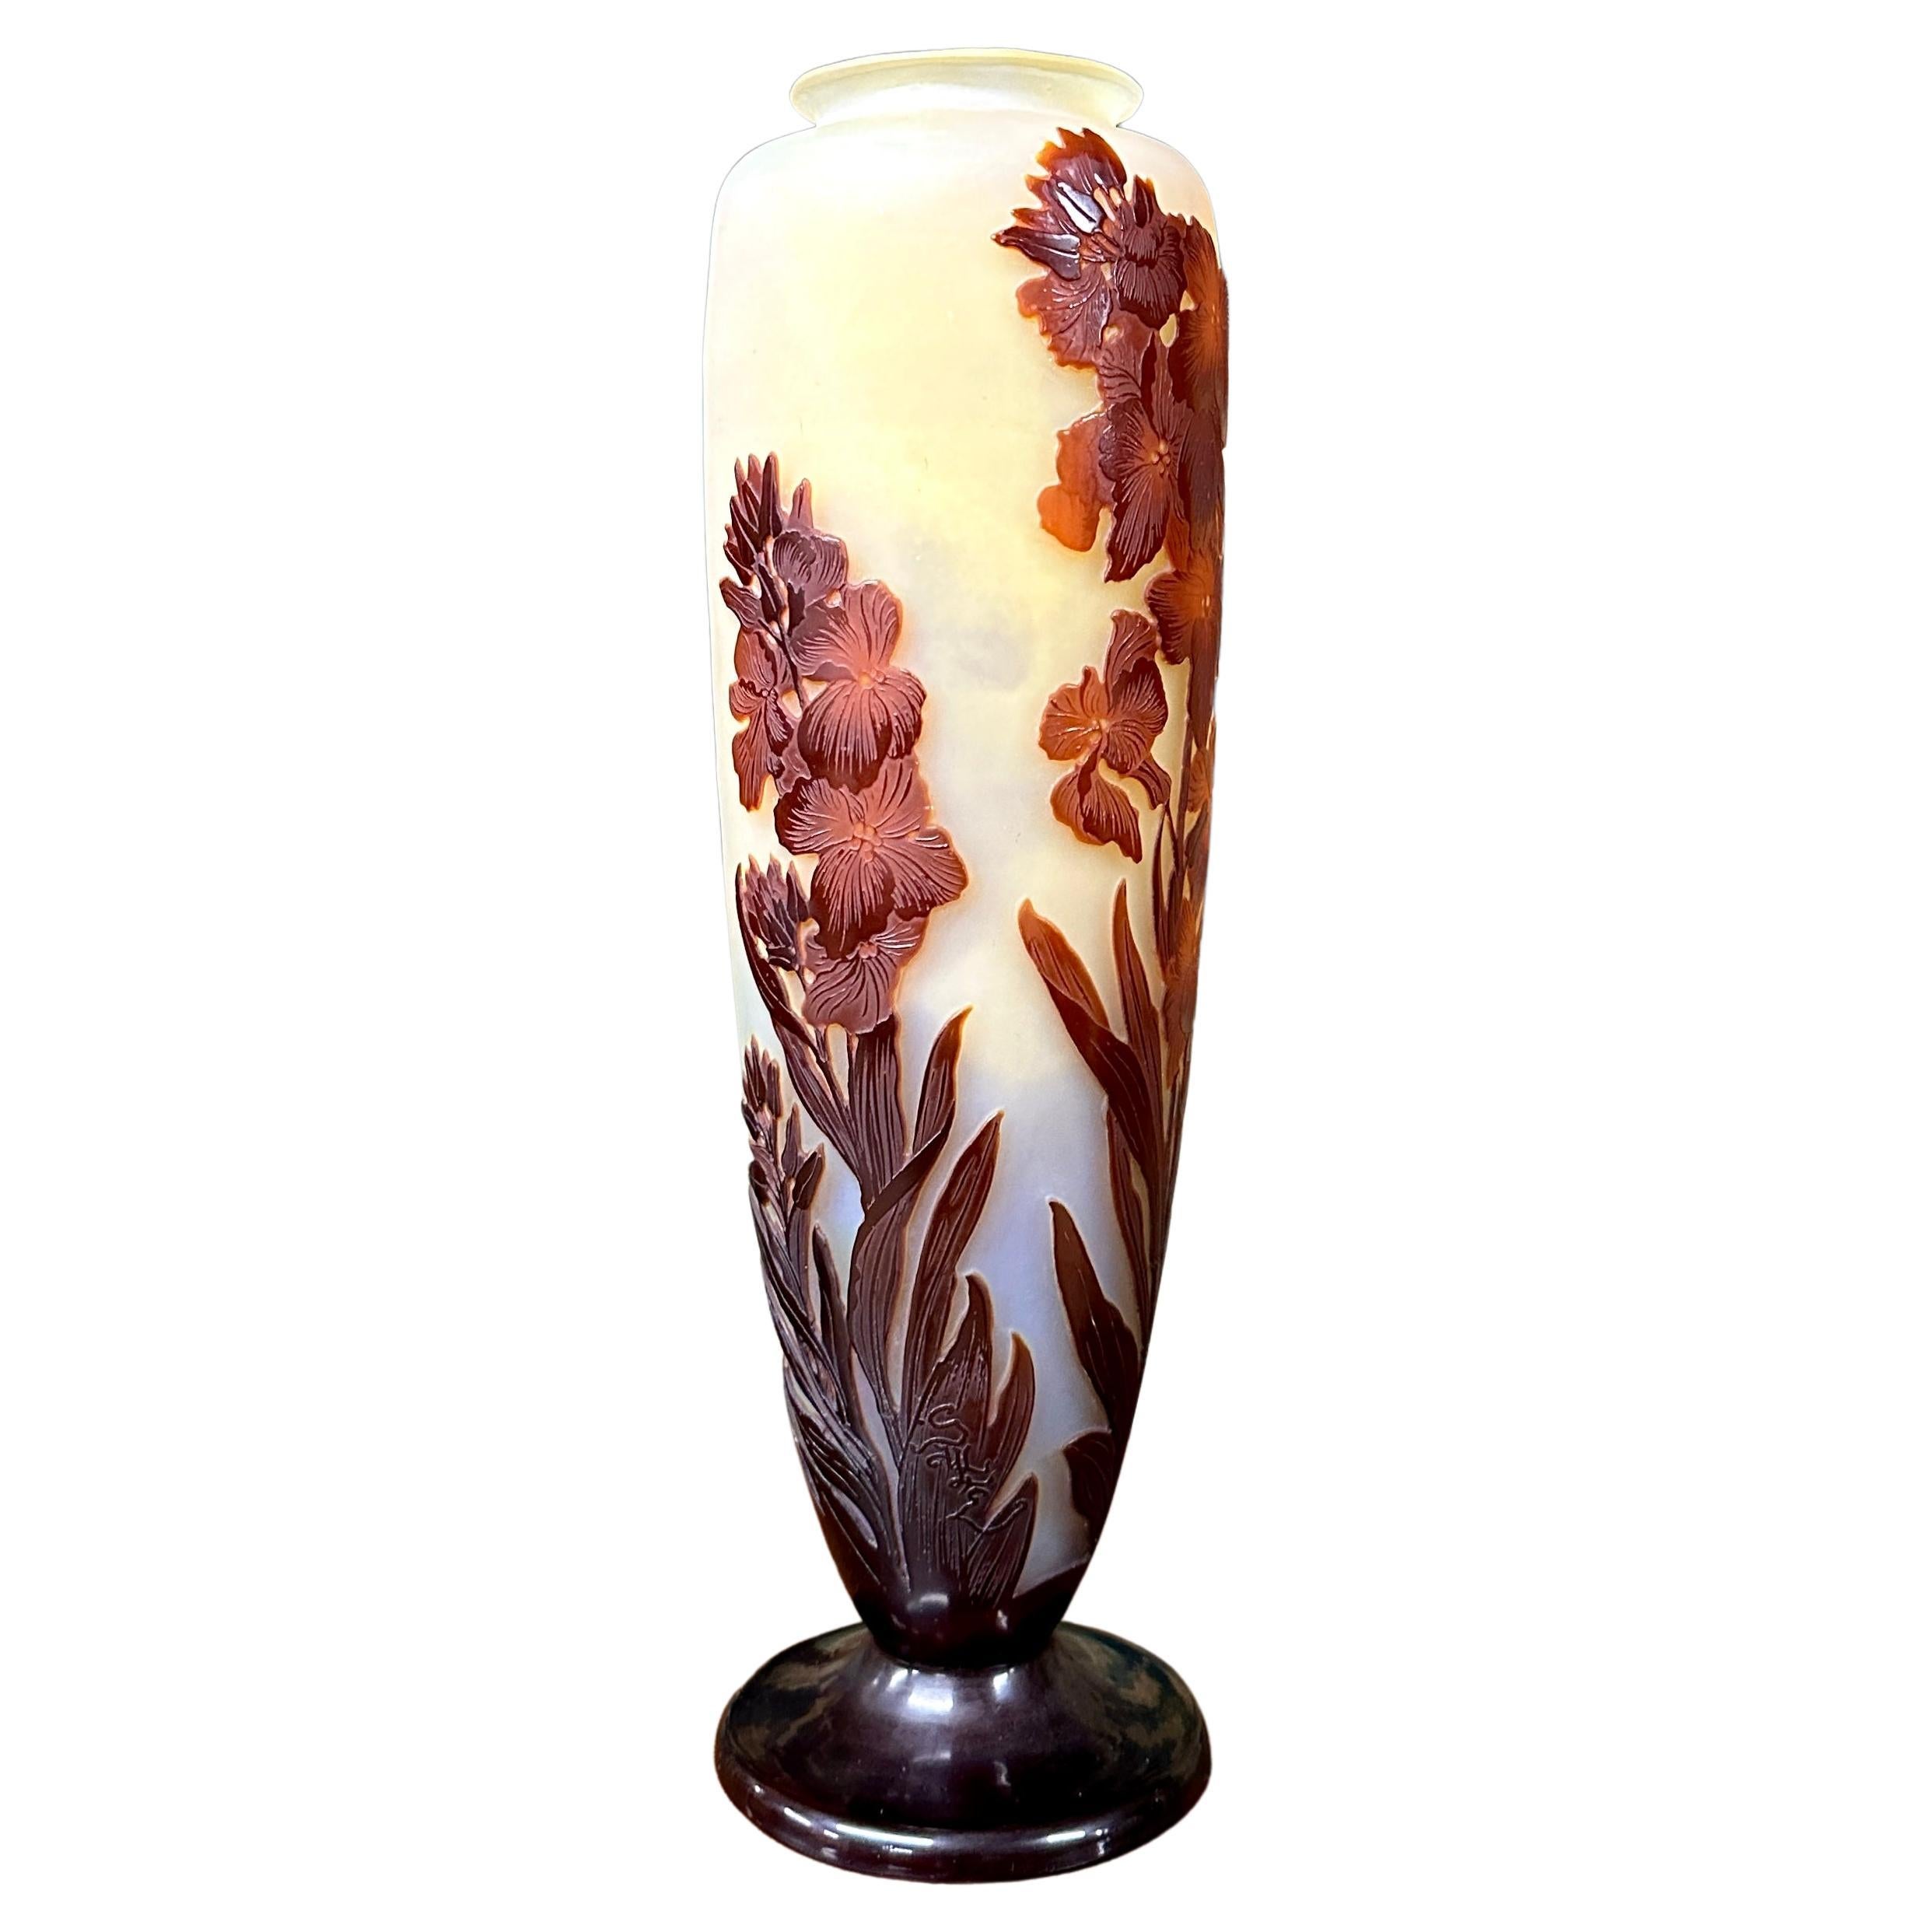 Emile Gallé, Large Vase Decorated with Red Flowers, Art Nouveau Glass Pate